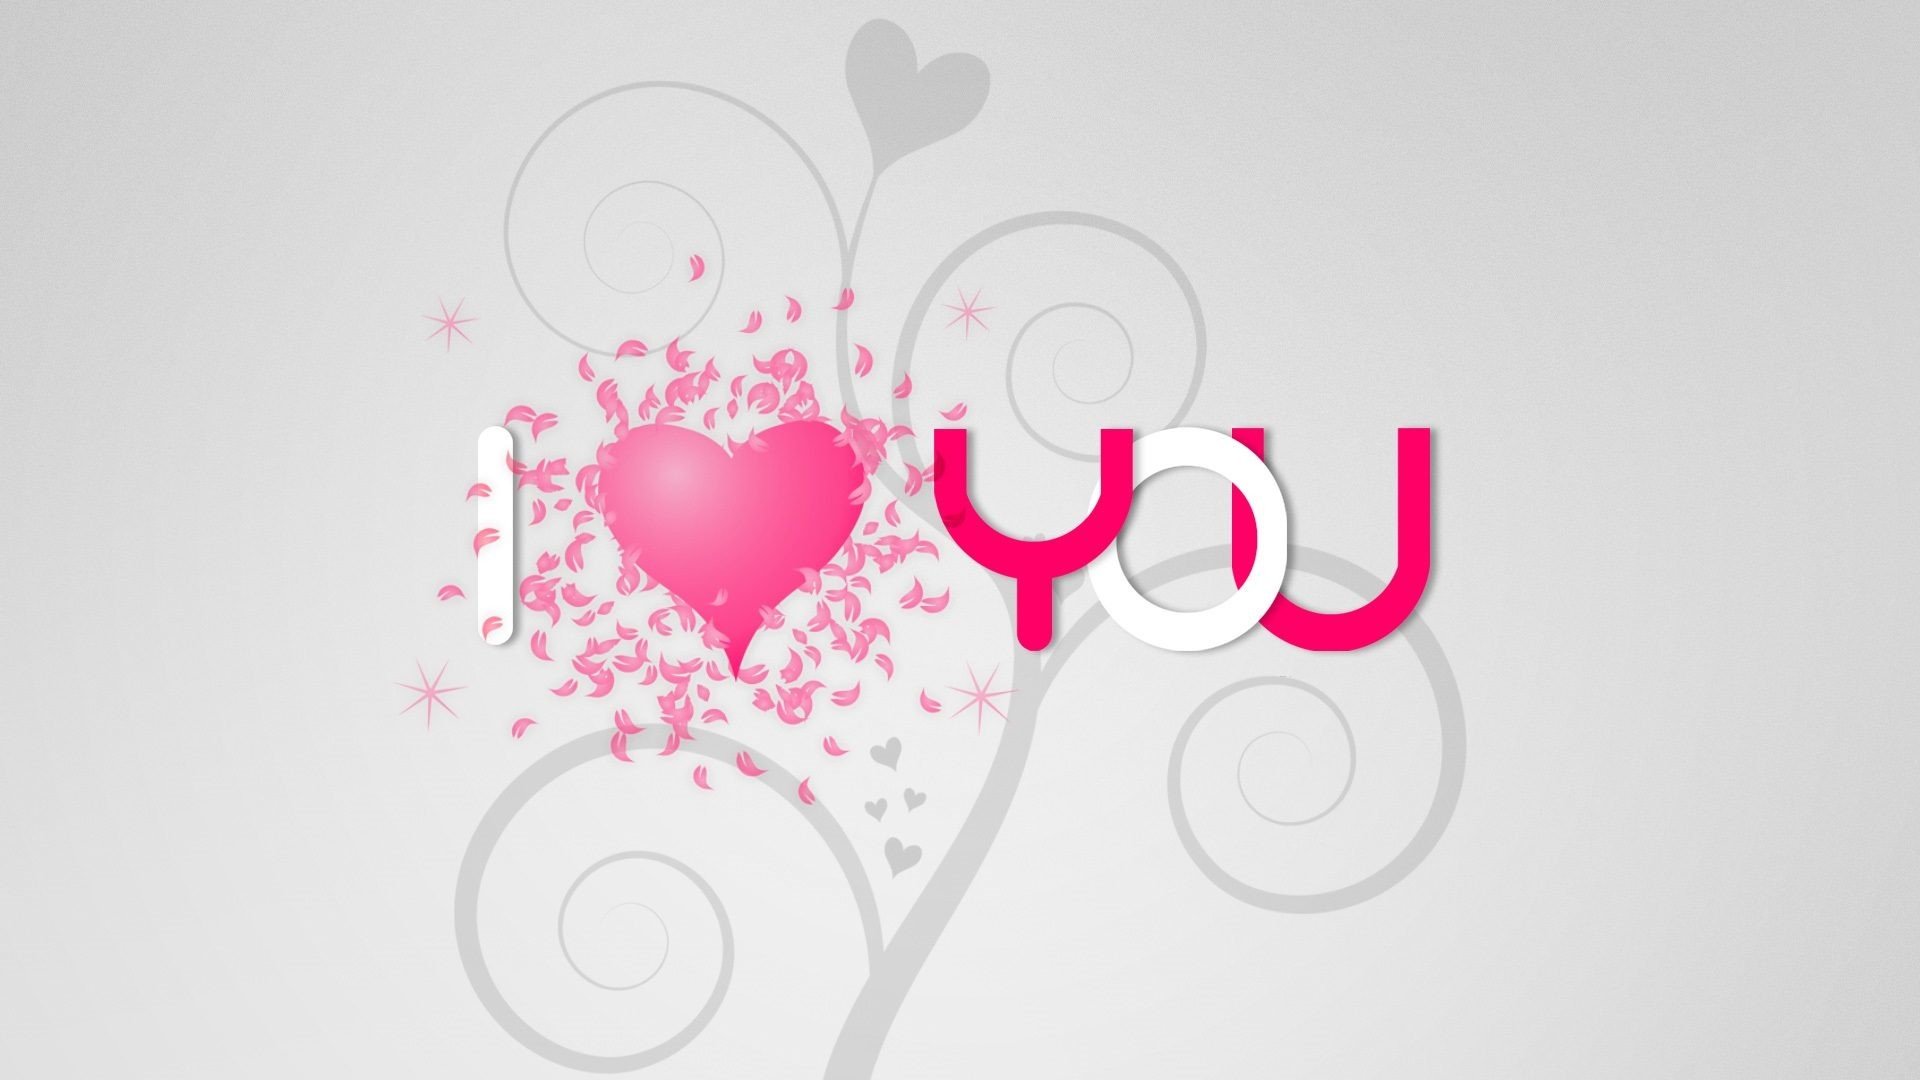 Image I Love you Pink Heart Abstract Wallpaper